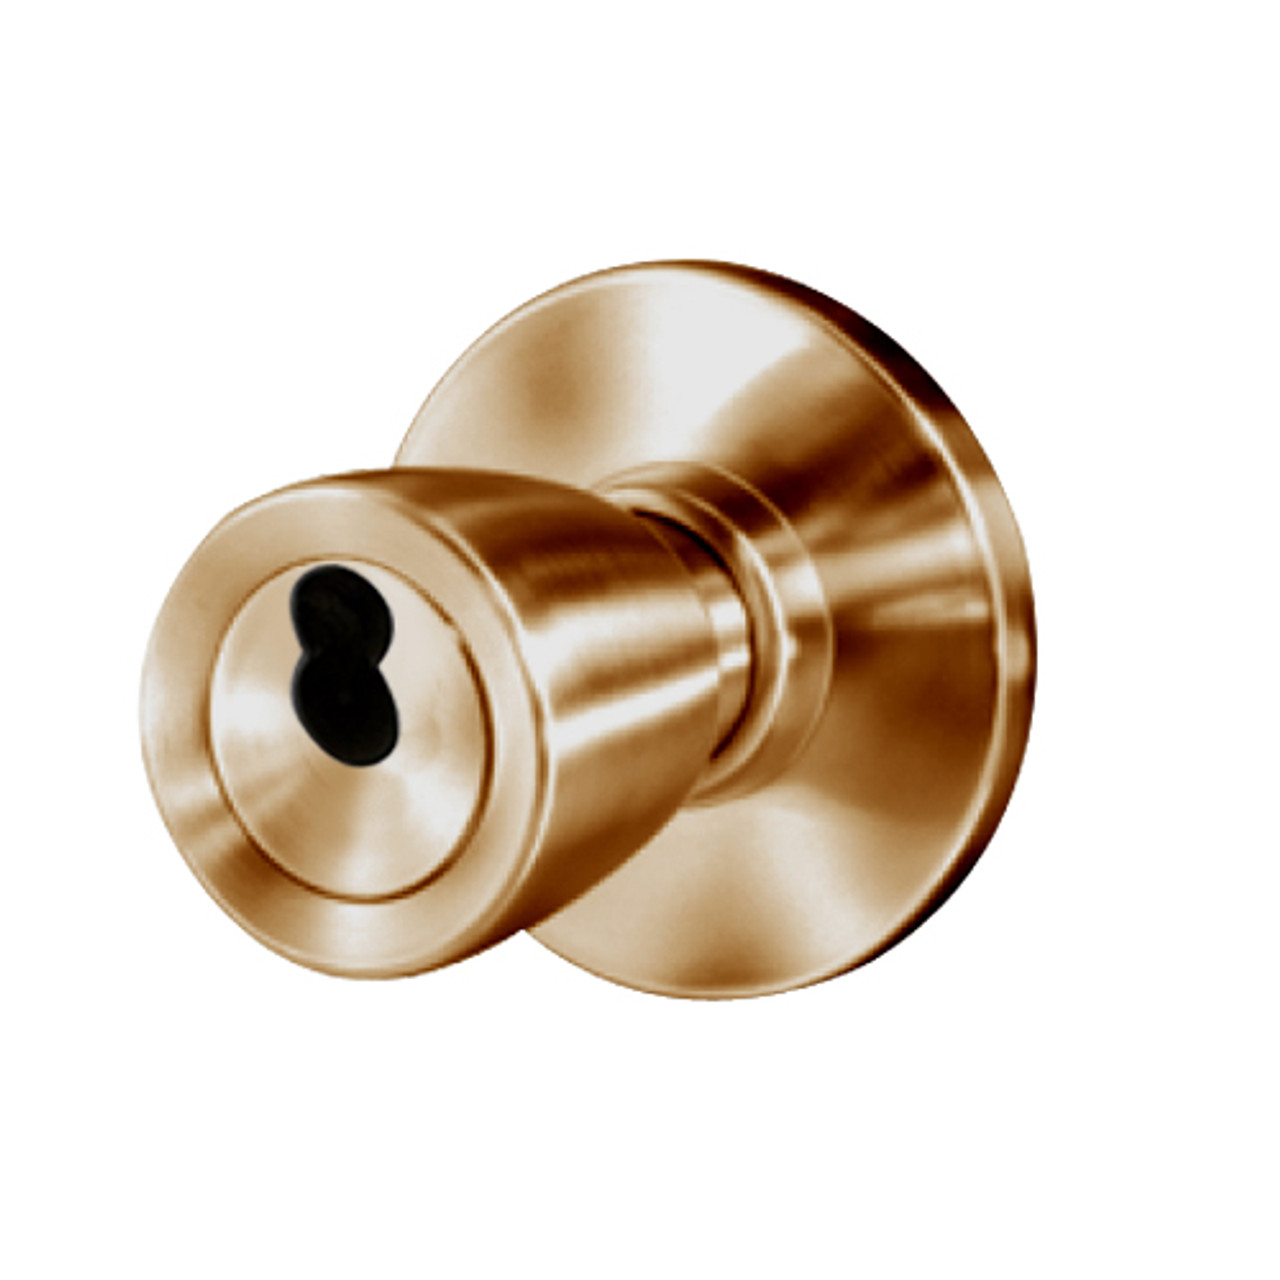 8K37AB6AS3612 Best 8K Series Entrance Heavy Duty Cylindrical Knob Locks with Tulip Style in Satin Bronze